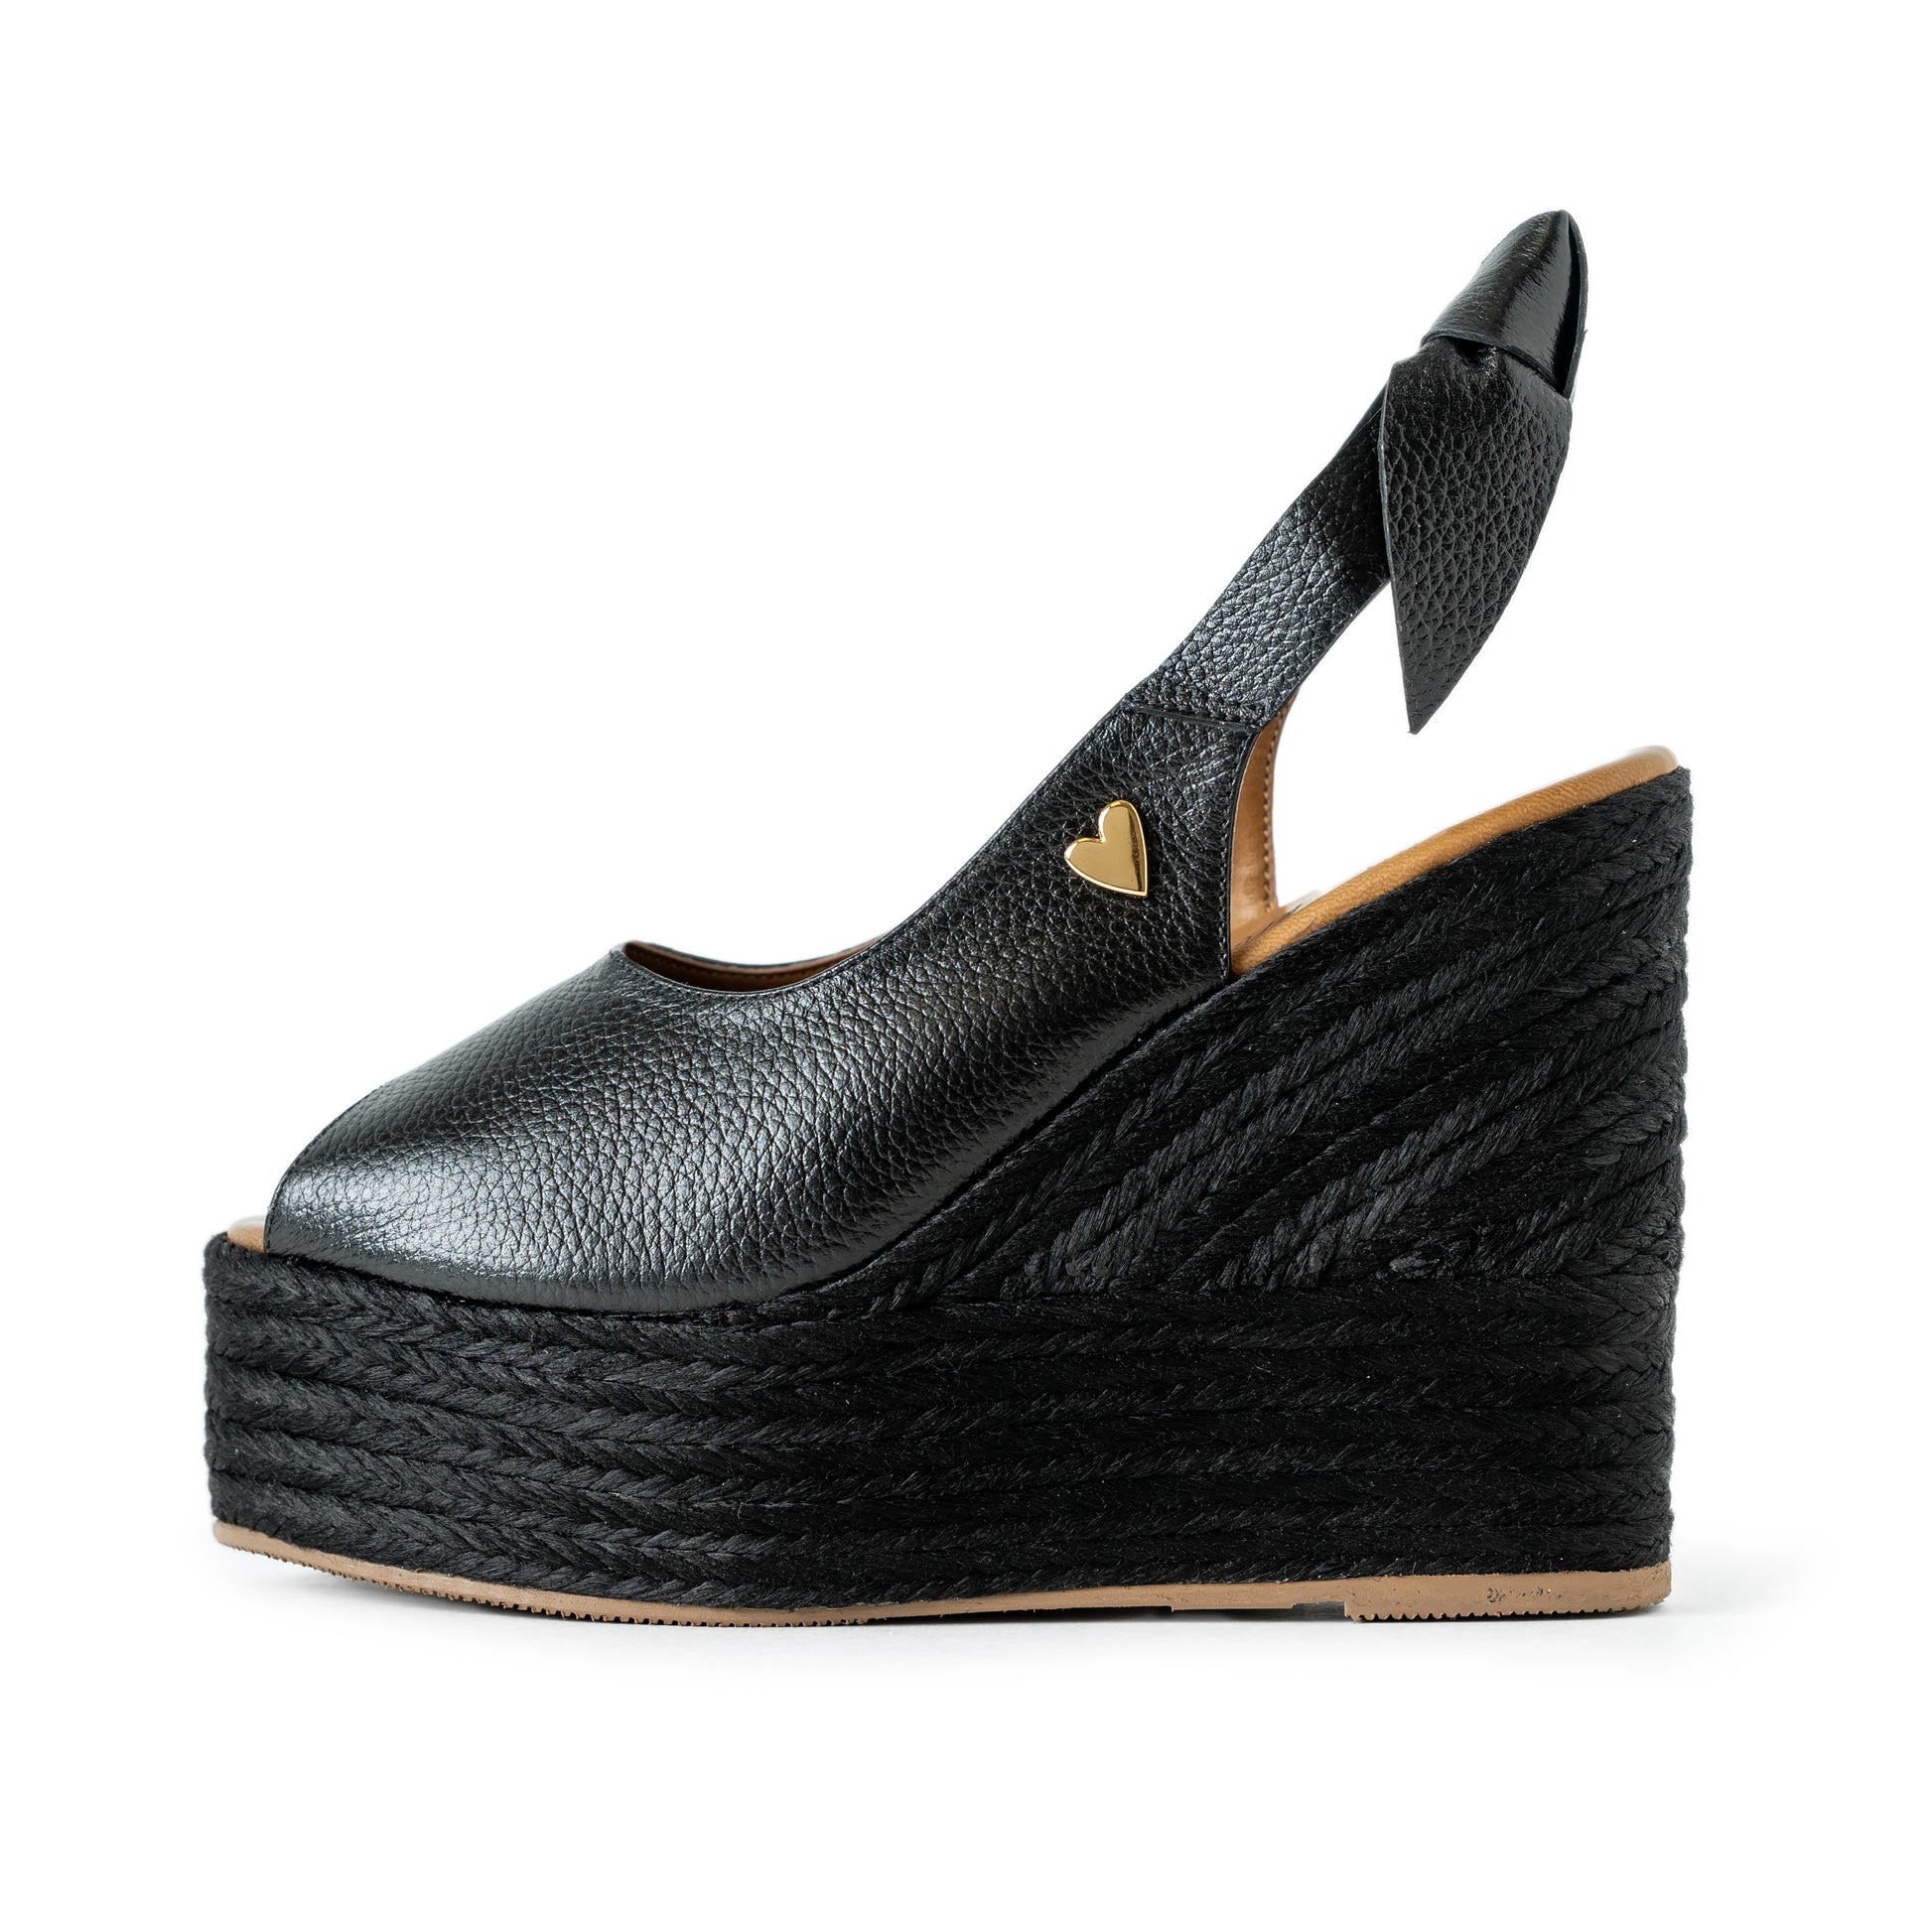 Peep Toe by Nataly Mendez Natural jute base Genuine leather upper Genuine leather insole. 5 inch heel height 2 inch platform